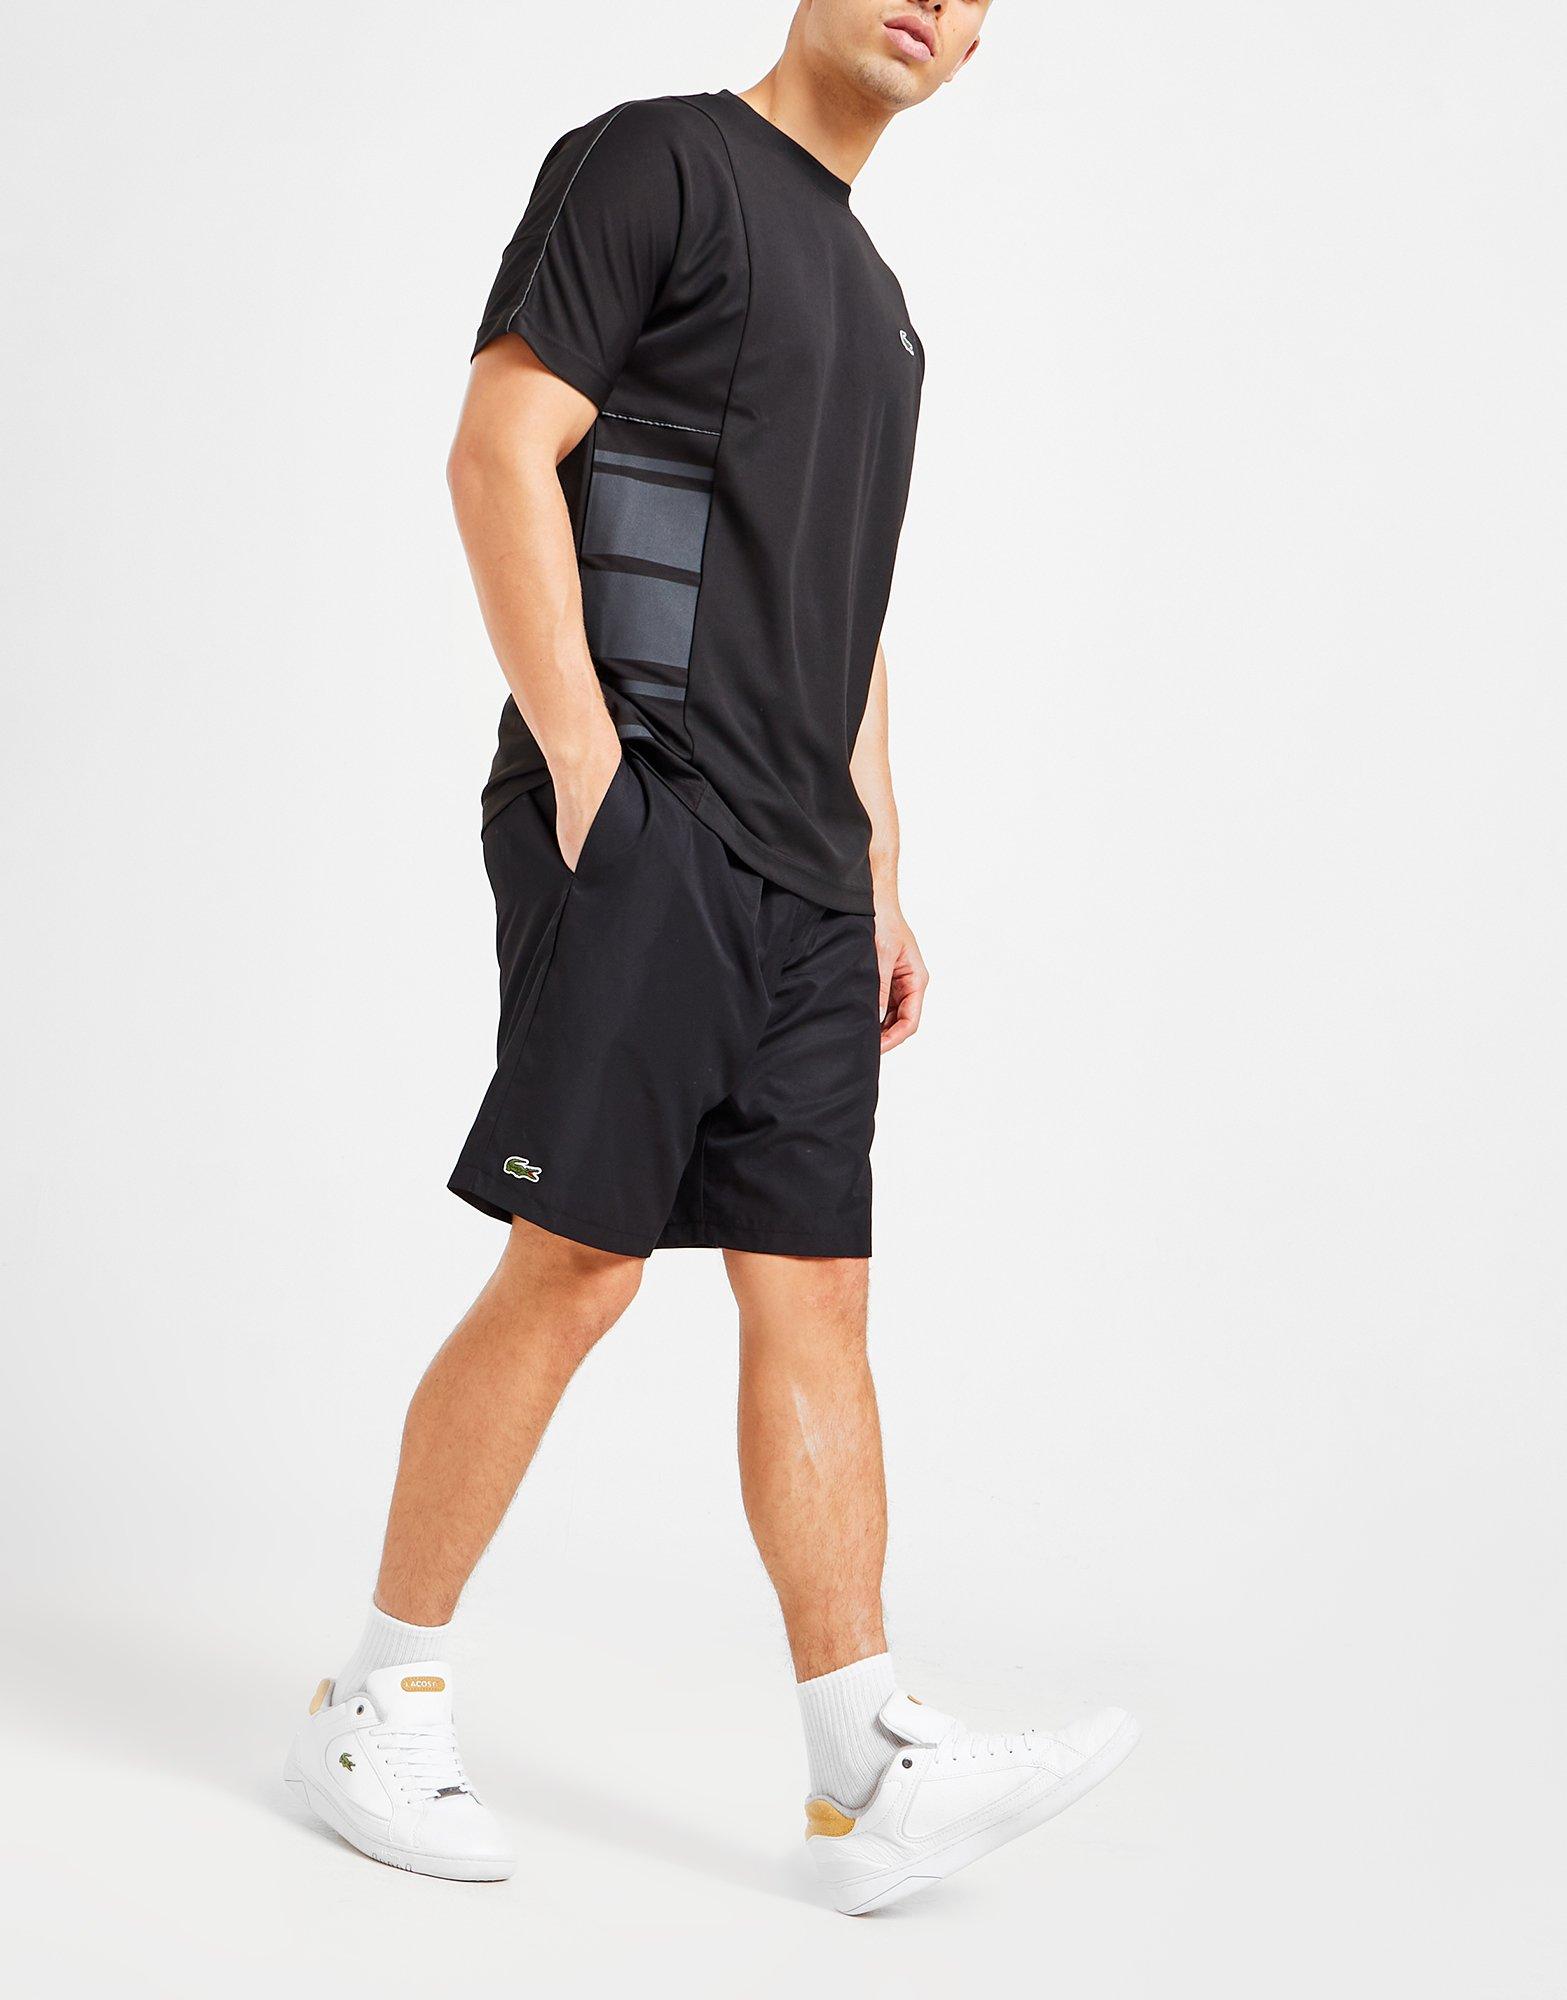 andre lacoste tennis